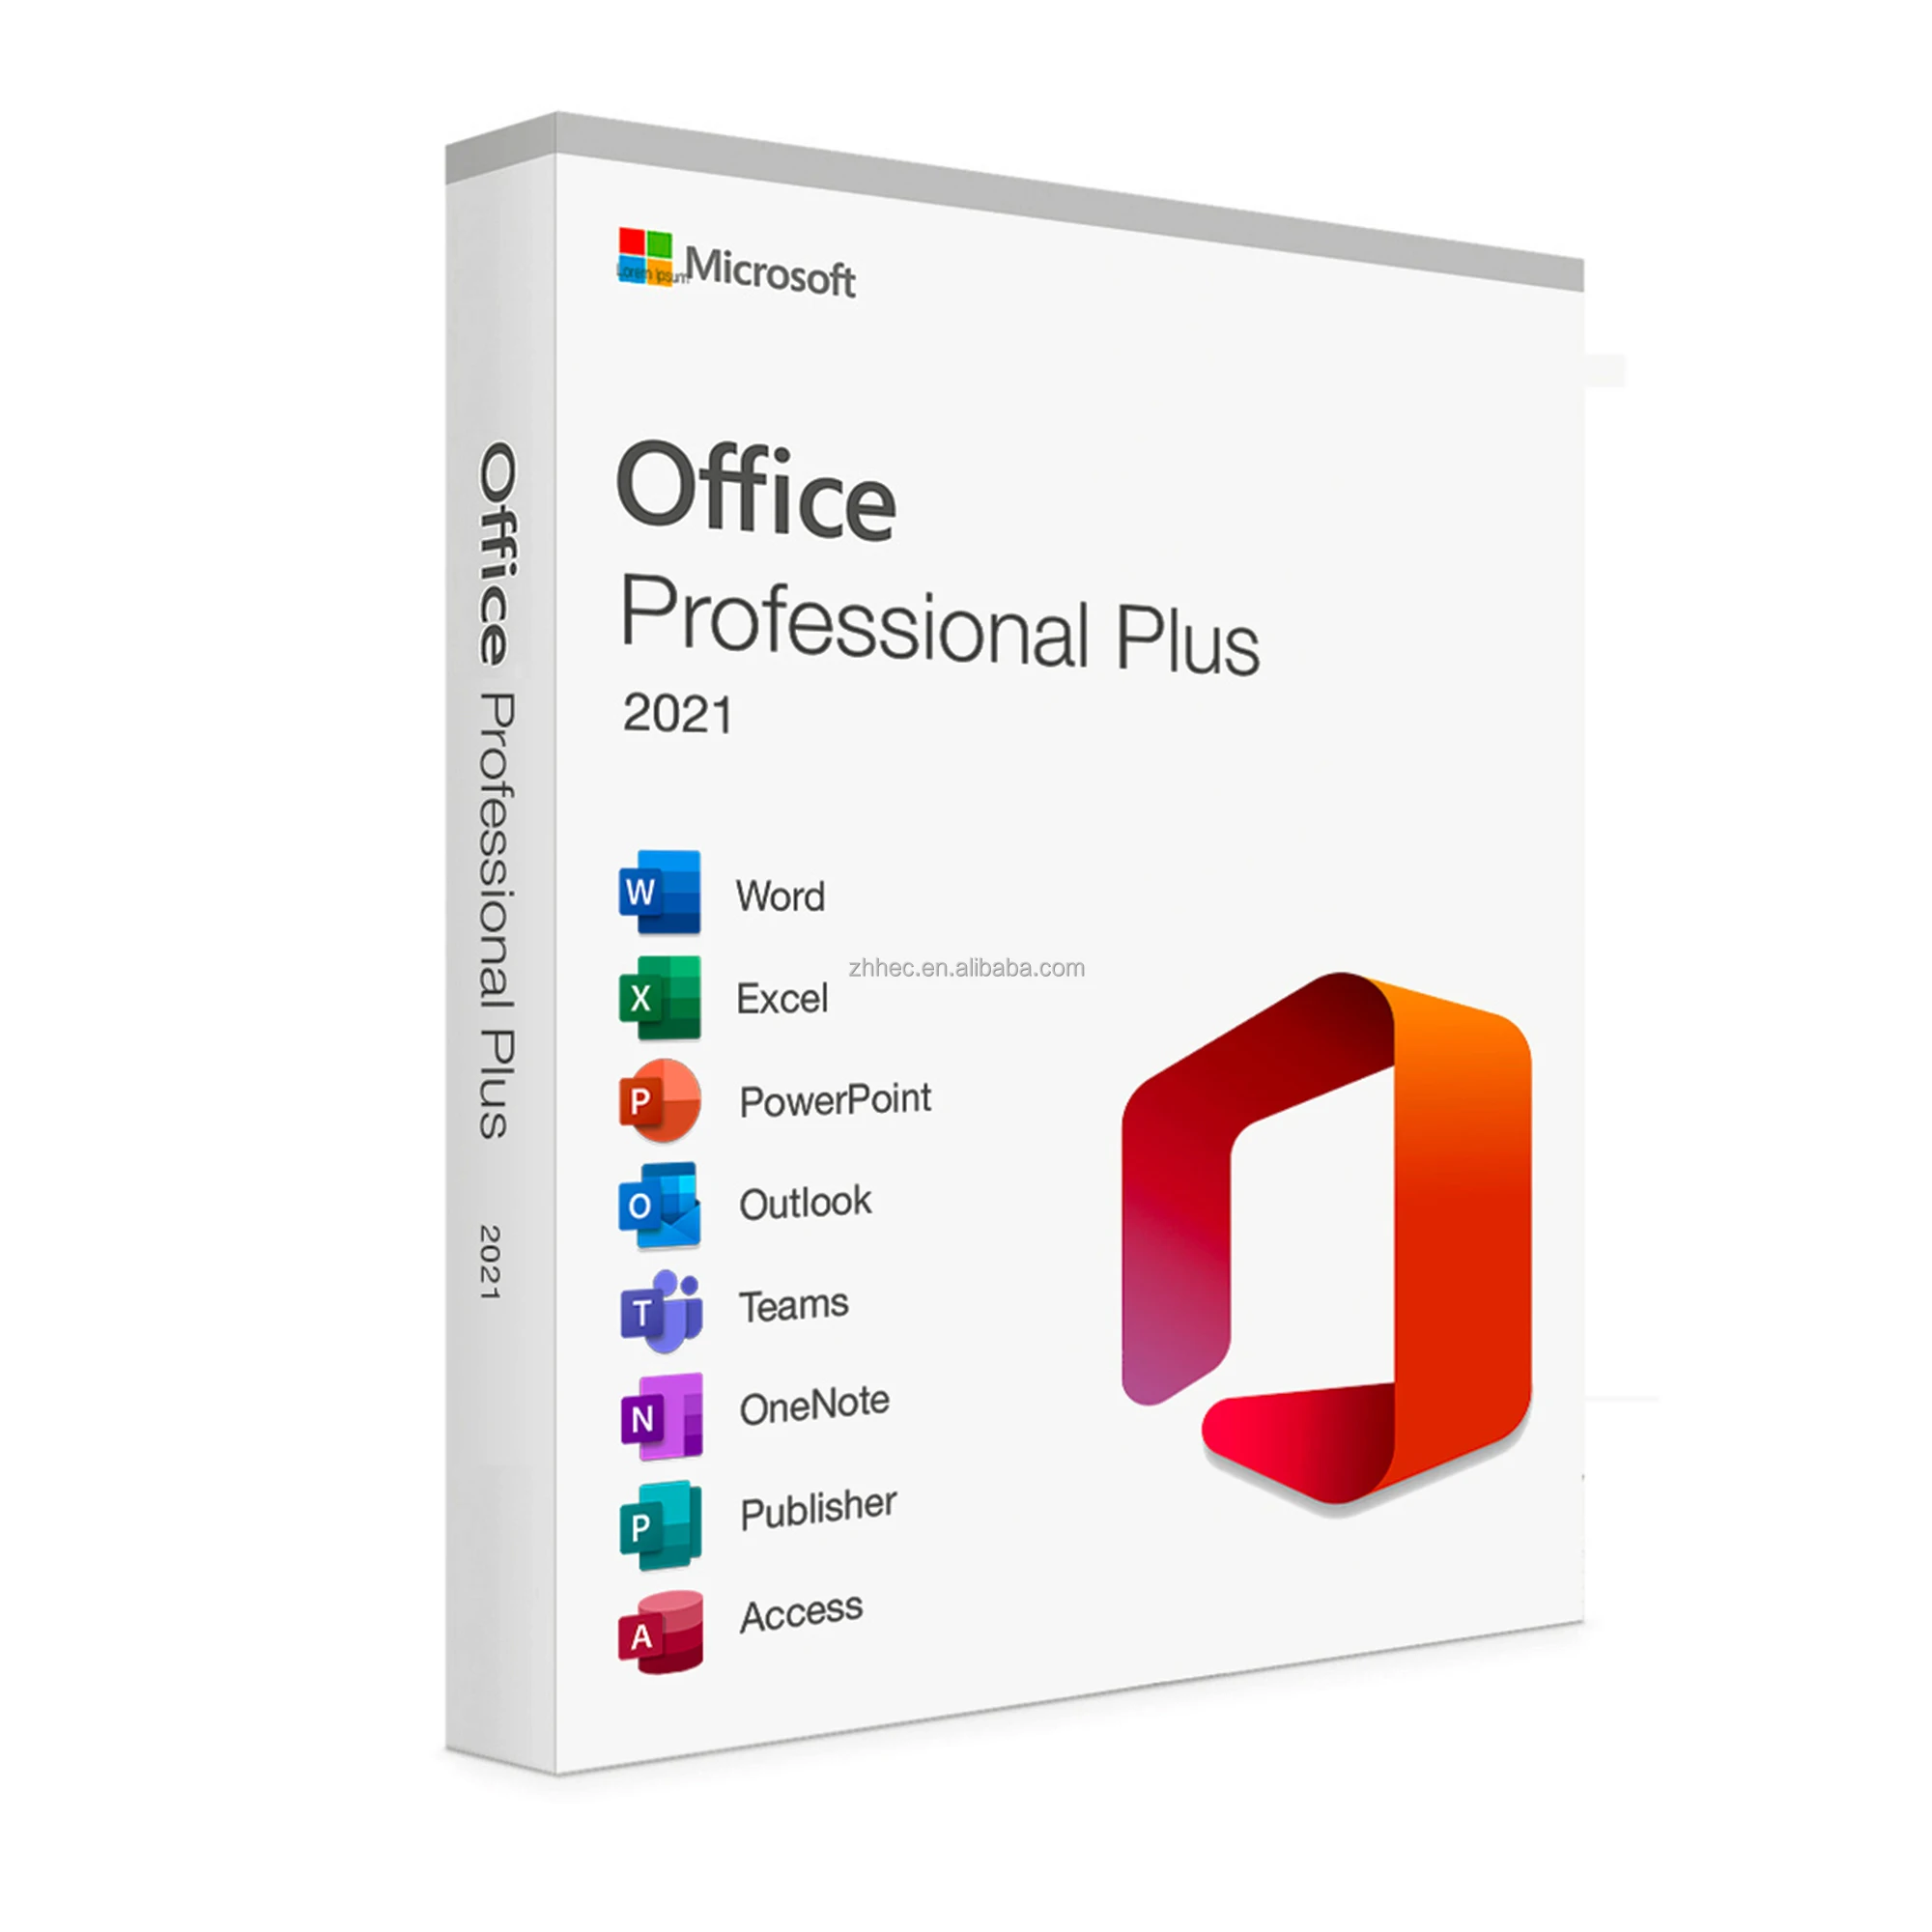 Office 2021 Professional Plus License Key for PC 100% Online Activation Key Office 2021 Pro Plus Send by Email